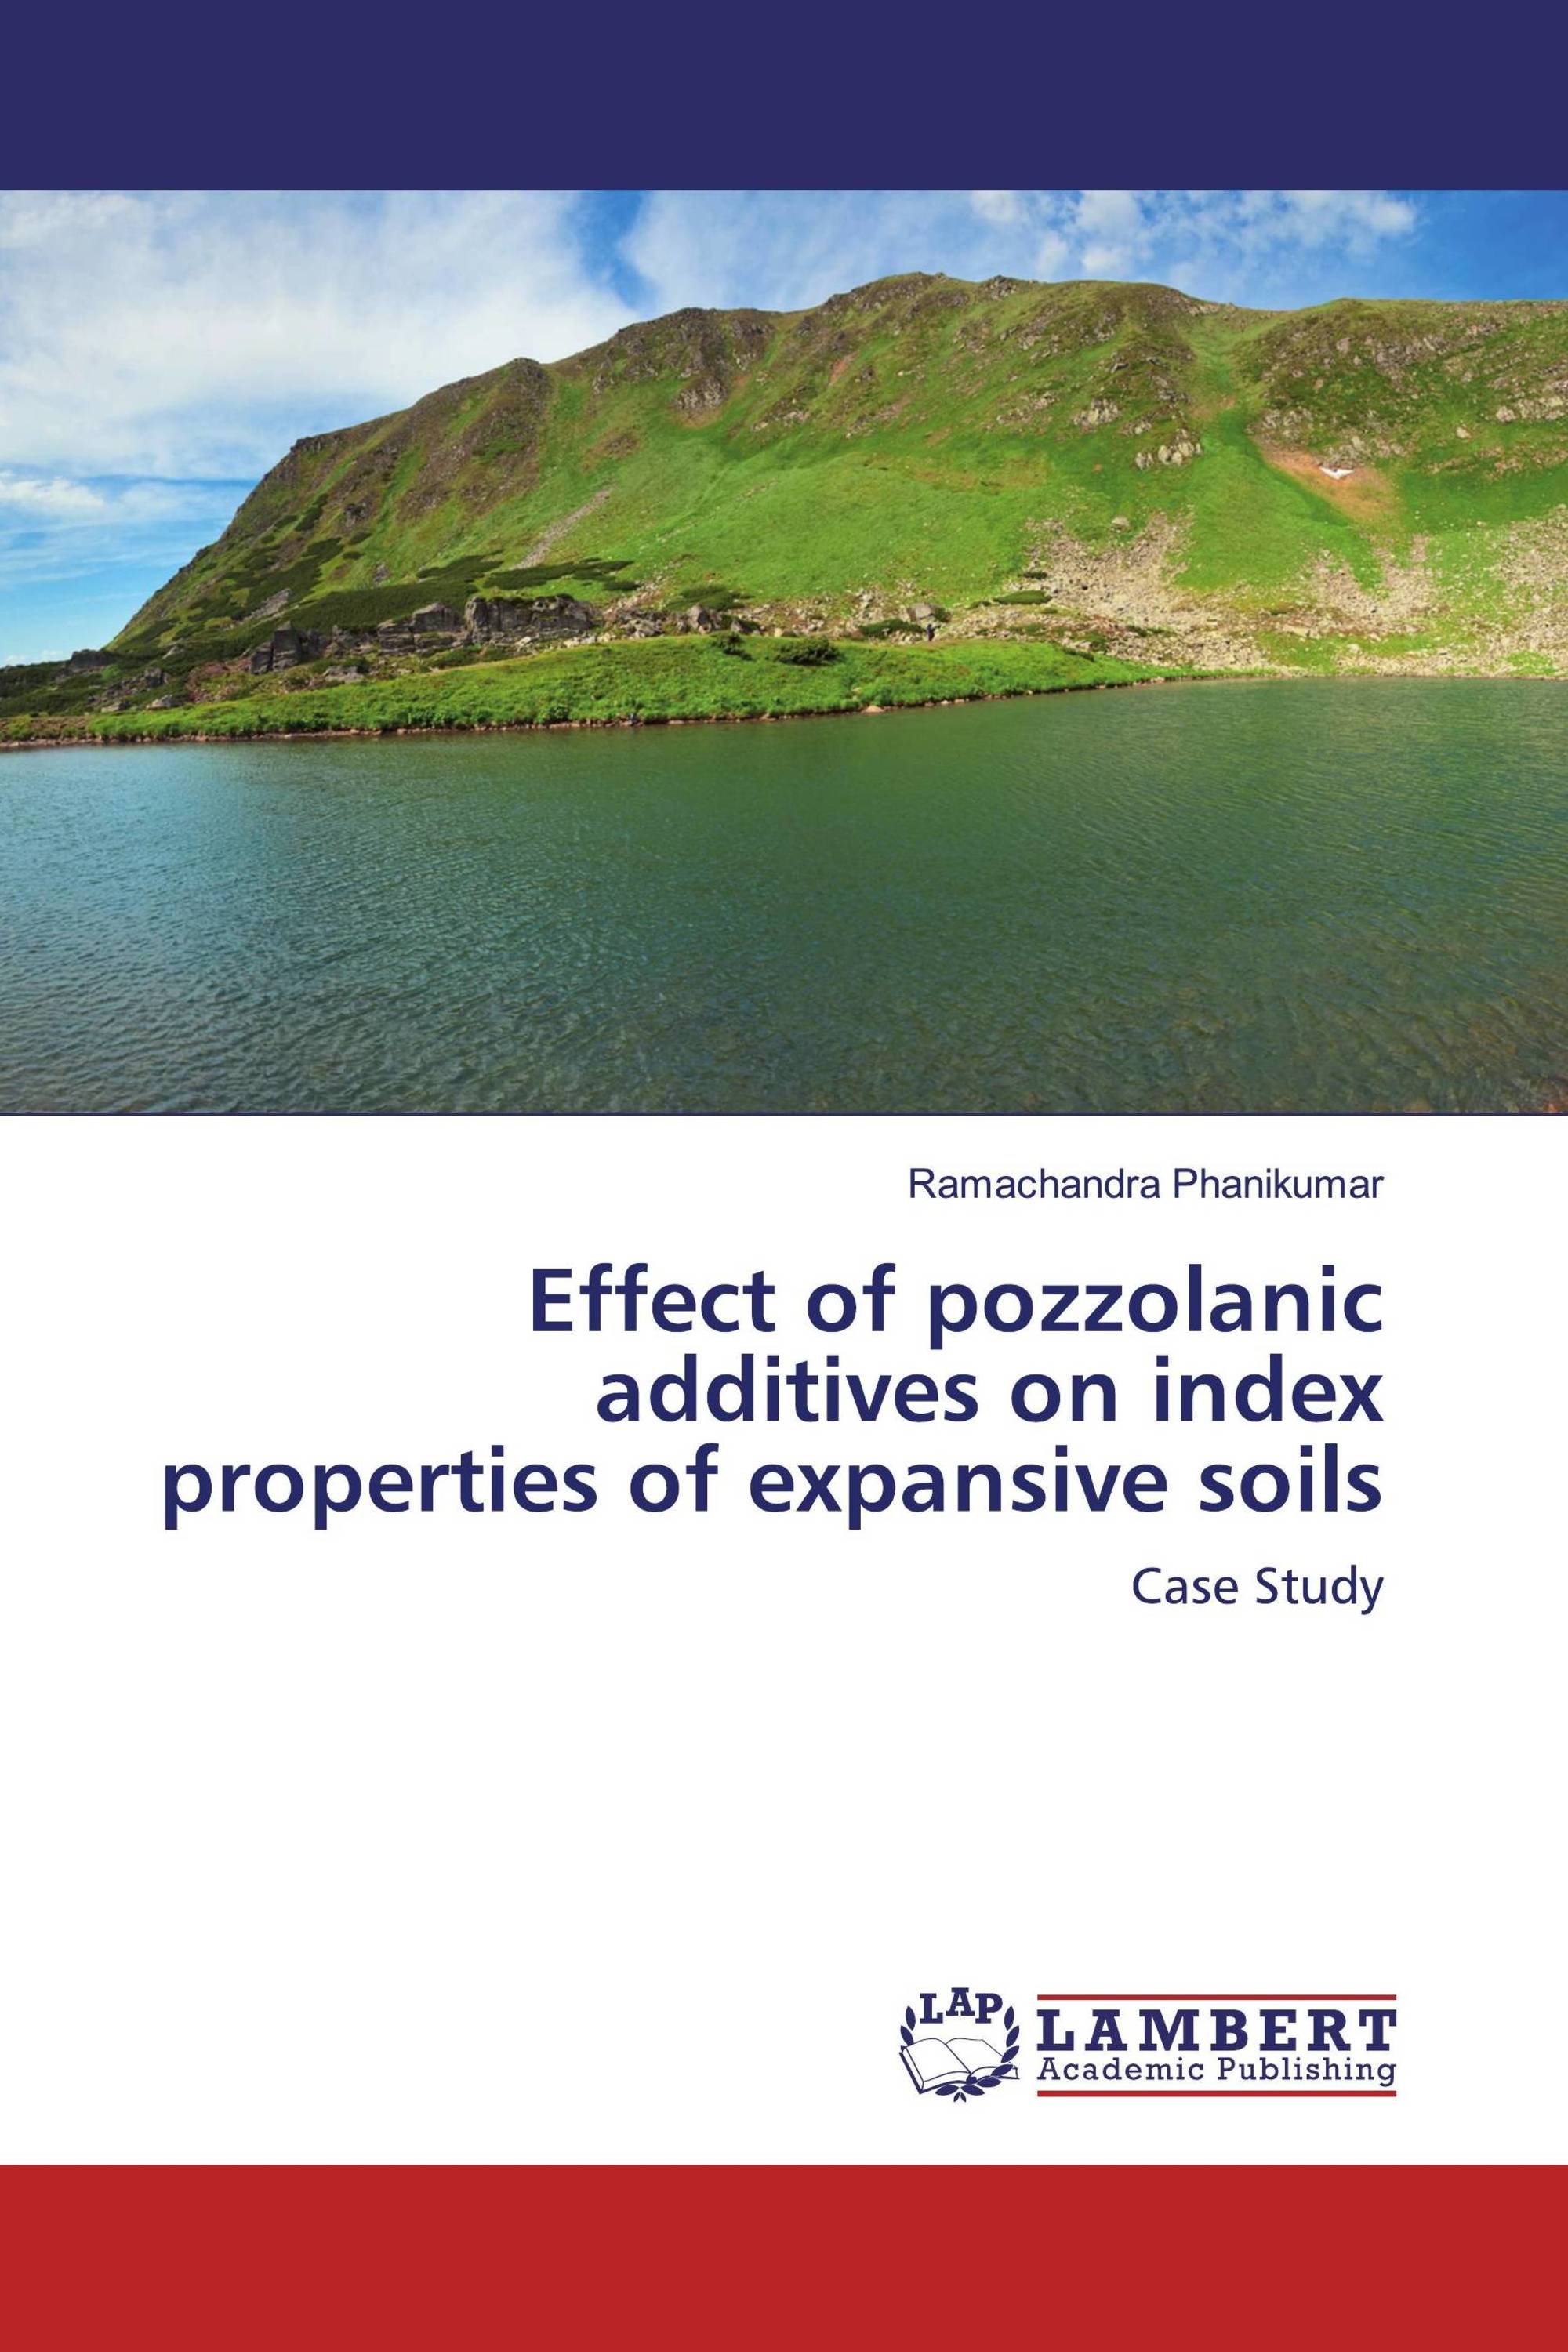 Effect of pozzolanic additives on index properties of expansive soils